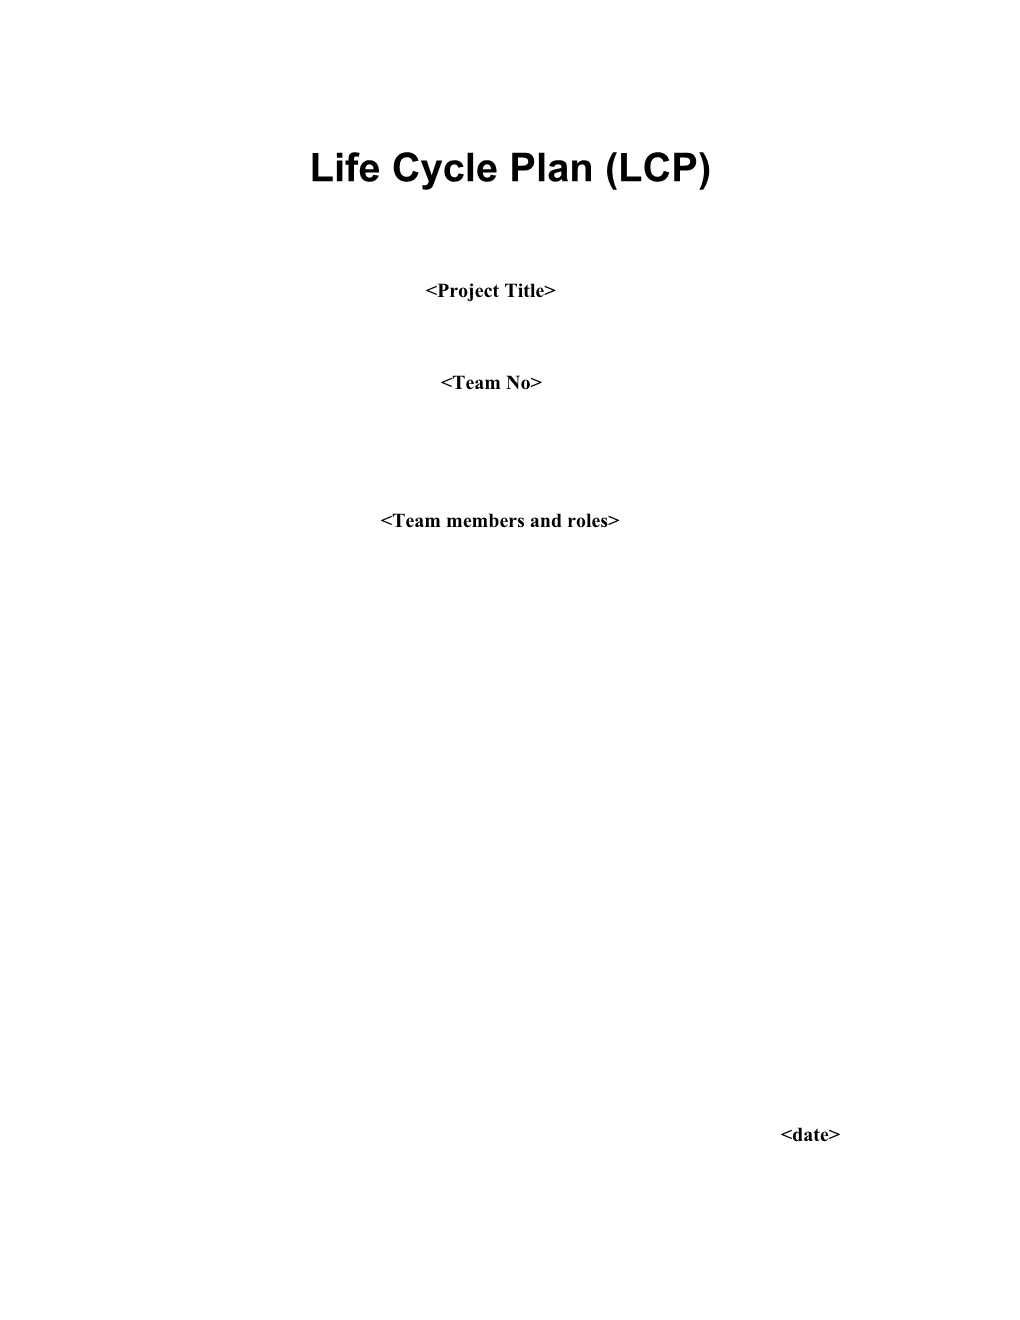 Life Cycle Plan (LCP) Template Version X.X